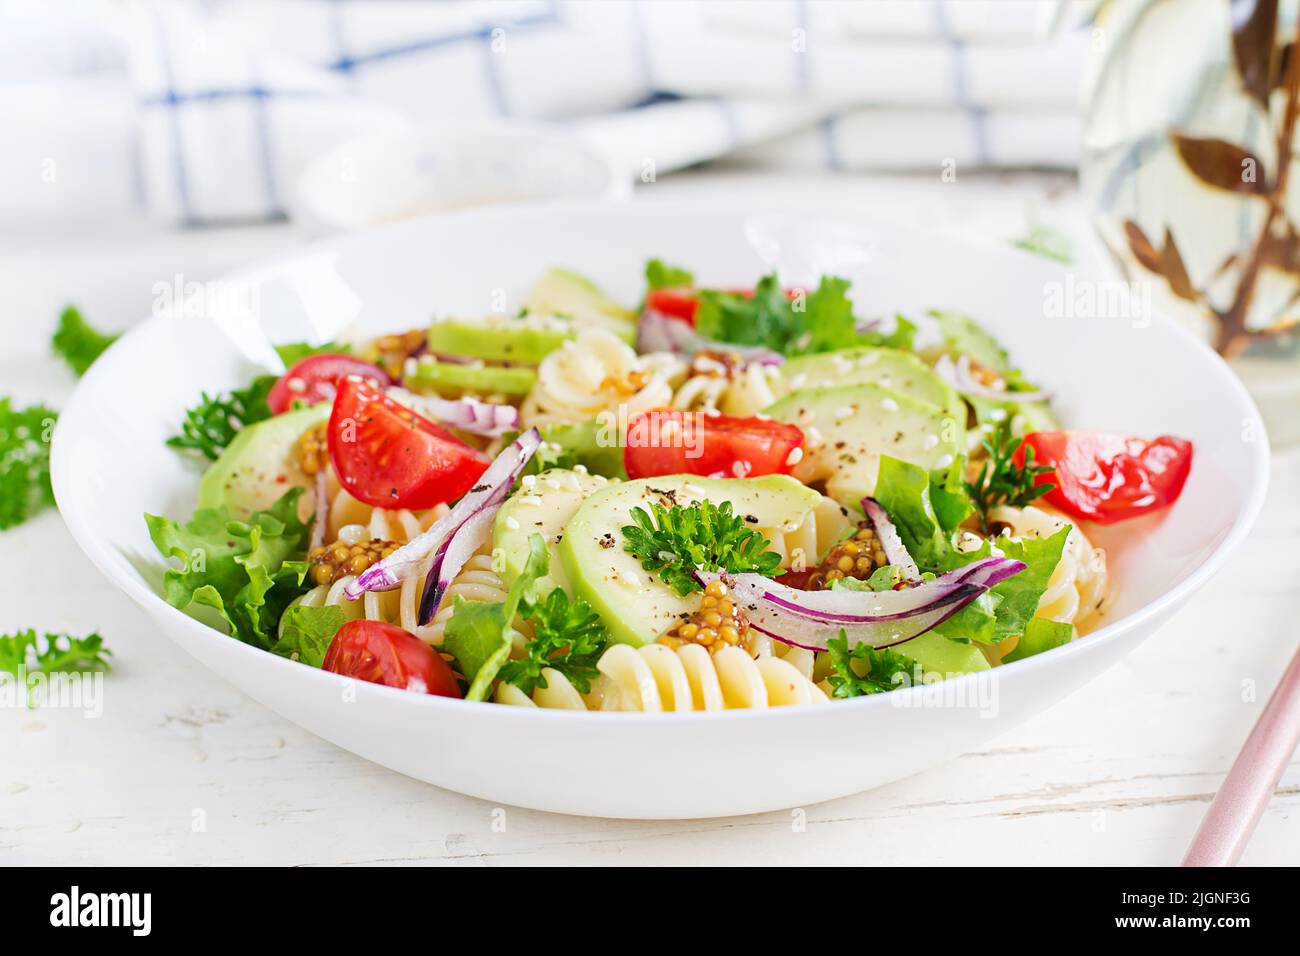 Fusilli pasta salad with avocado, tomatoes, fresh green lettuce, red onion and mustard dressing on white background. Vegetarian healthy lunch. Stock Photo